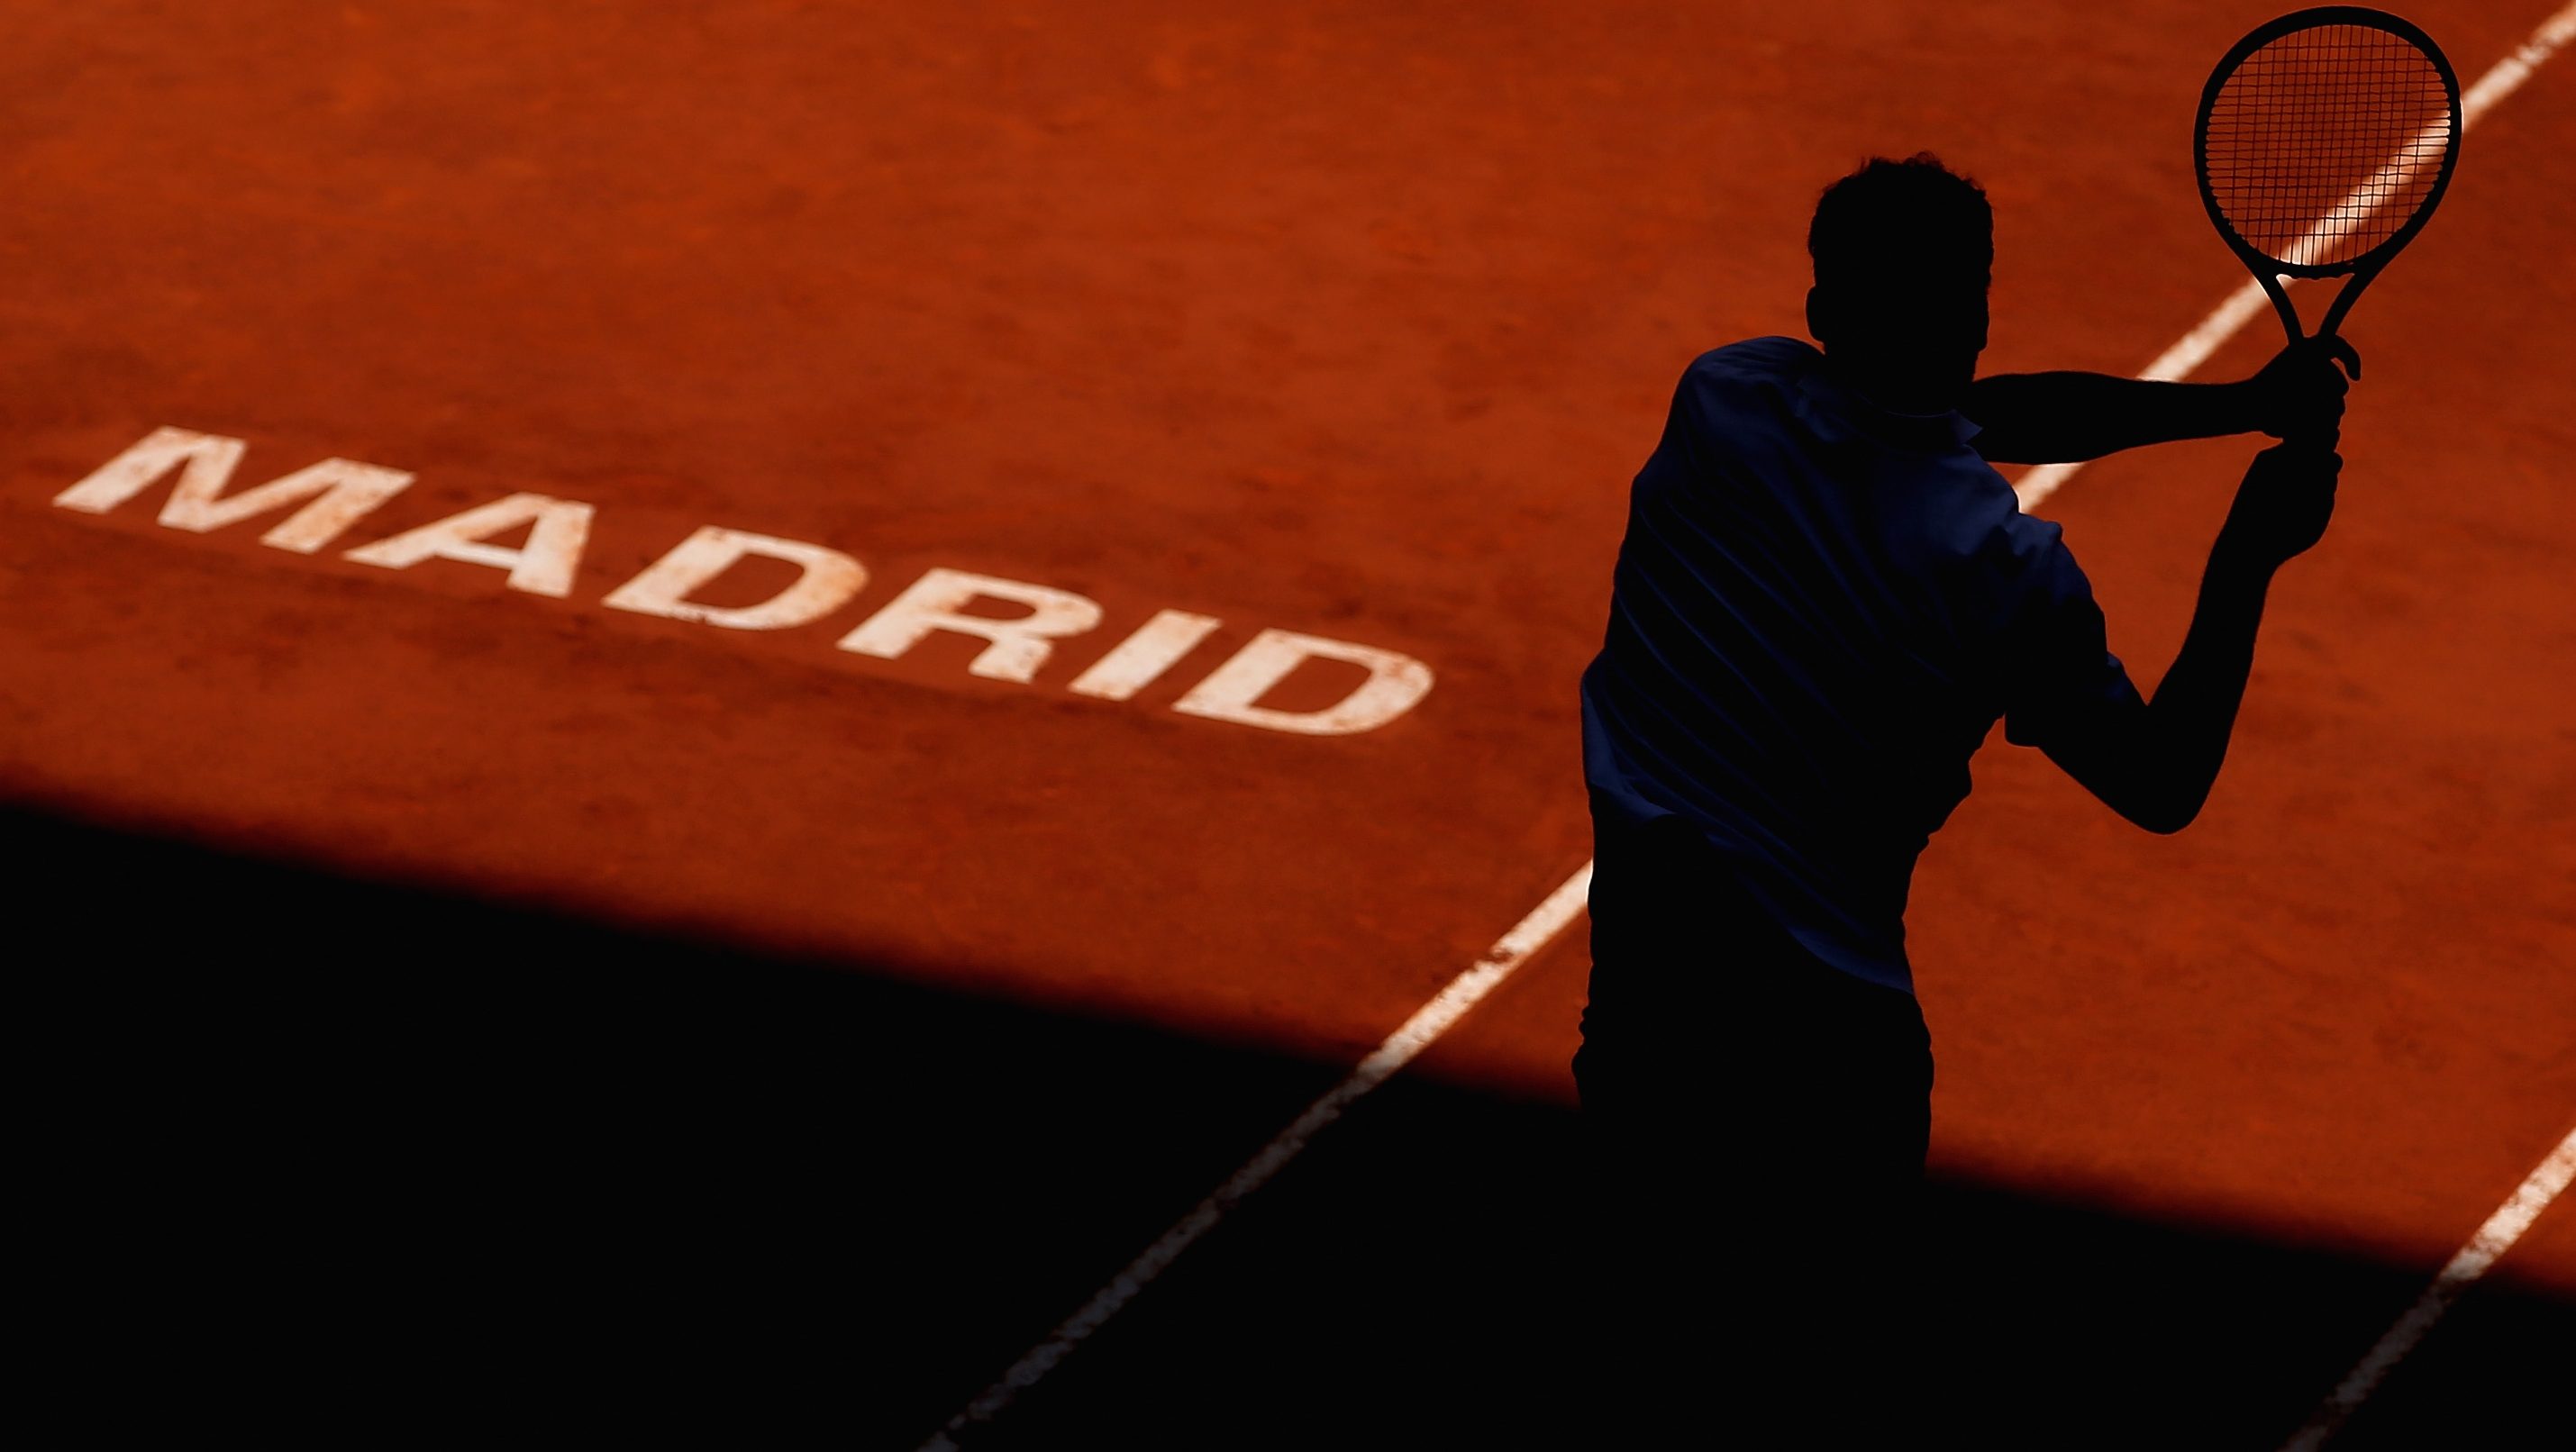 Madrid Open Final Live Stream How to Watch Online